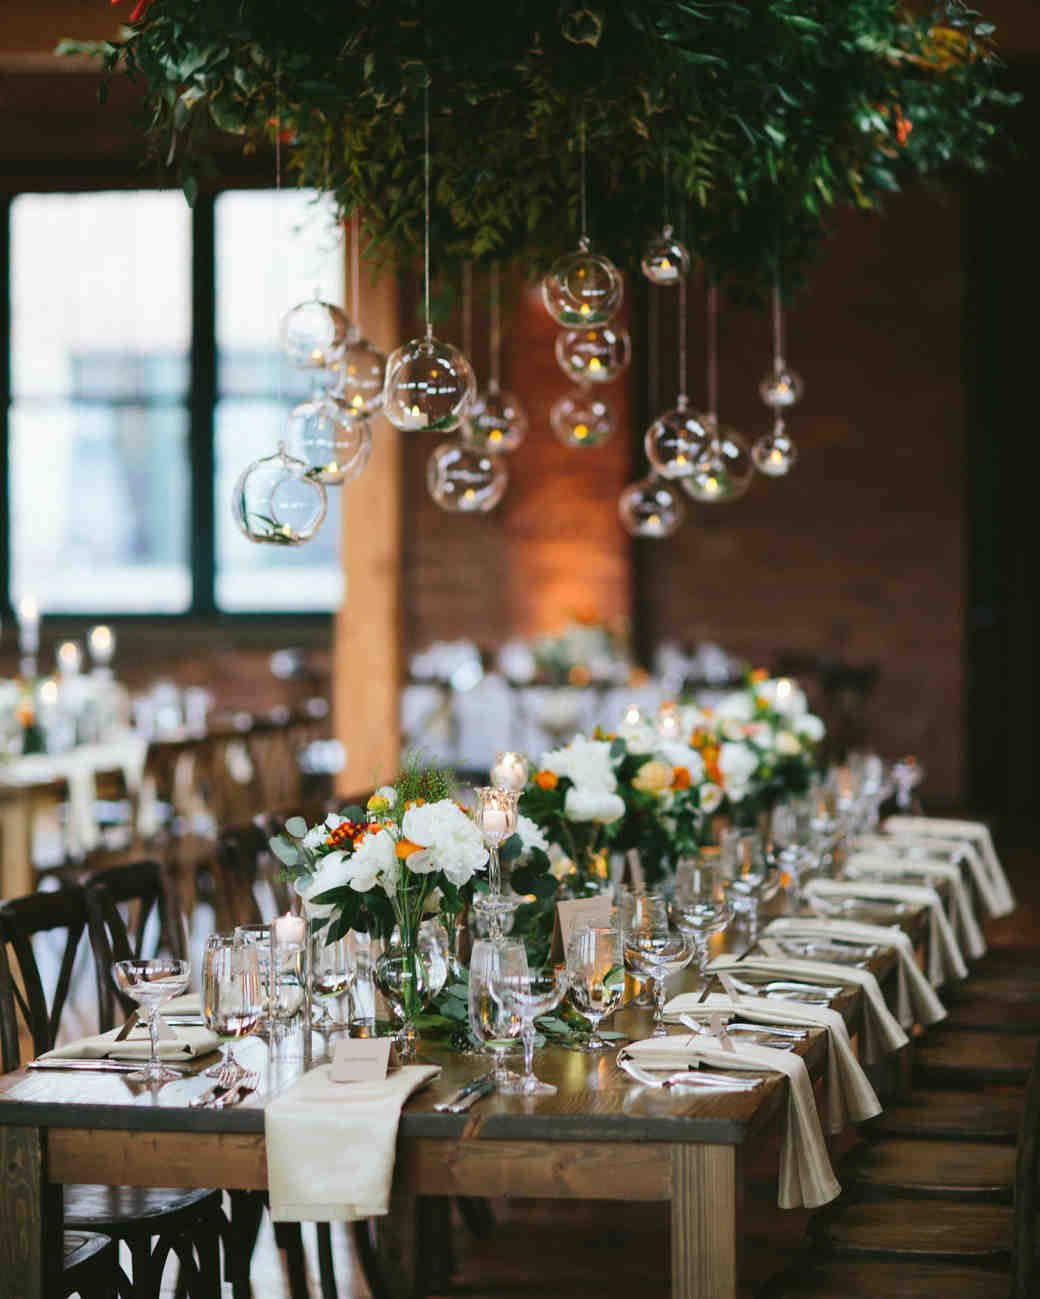 Wedding Head Table Decorations
 28 Ideas for Sitting Pretty at Your Head Table